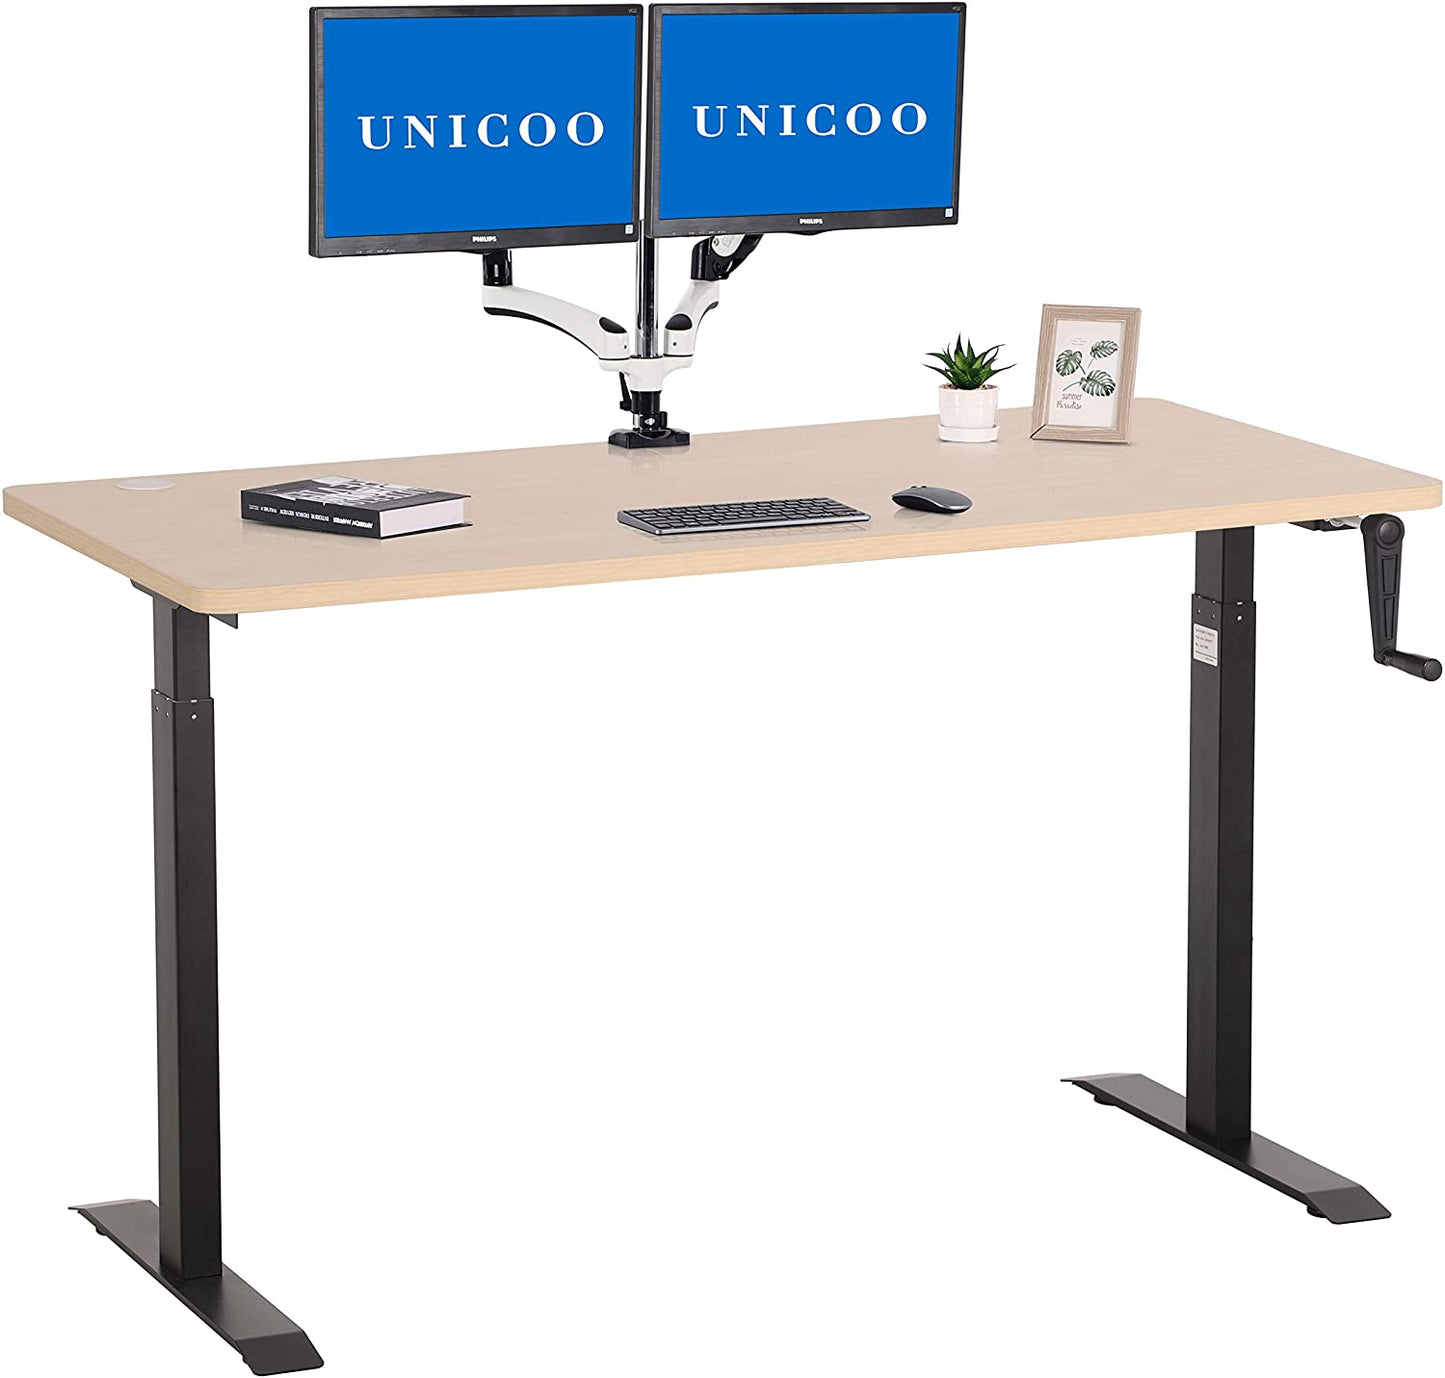 UNICOO – Premium Quality 55.12 x 27.6 Inch Crank Height Adjustable Standing Desk, Sit to Stand up Desk, Home Office Computer Table (55IN-Crank)